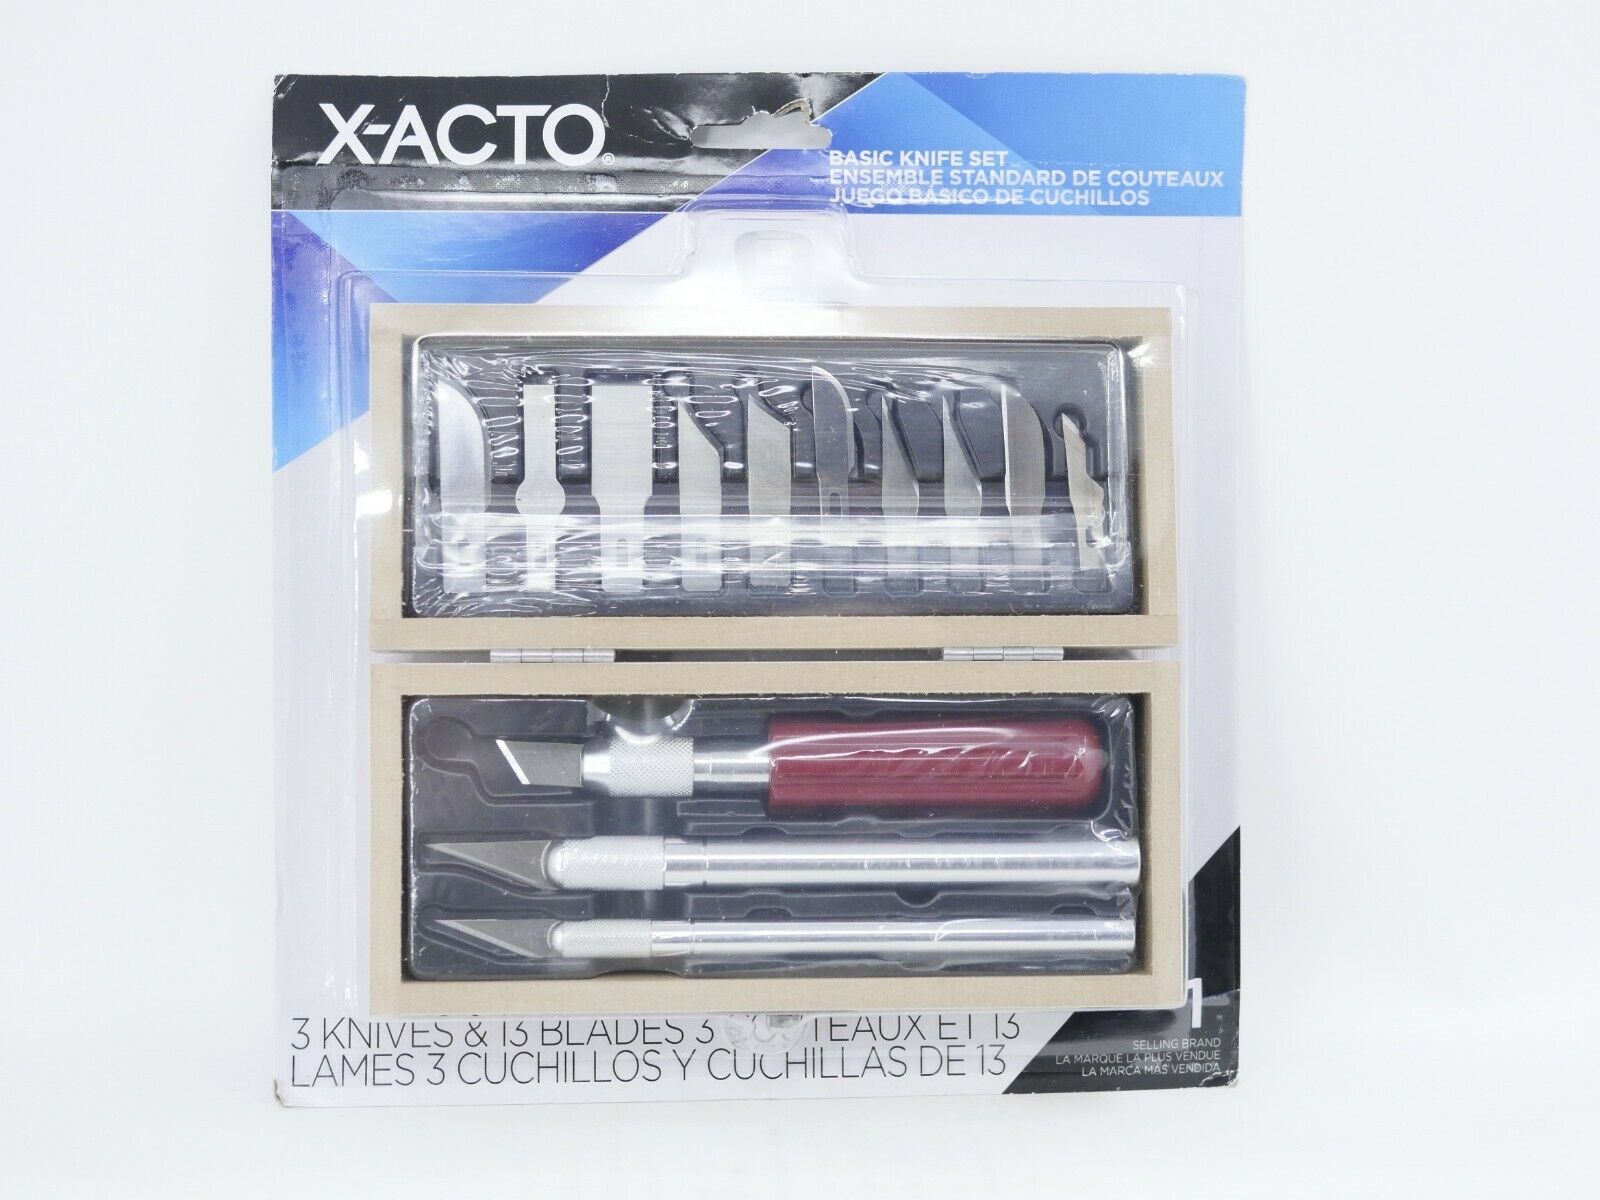 X-ACTO Basic Knife Set #1 with 3 Knives & 13 Blades with Case ~ Model X5282 New!